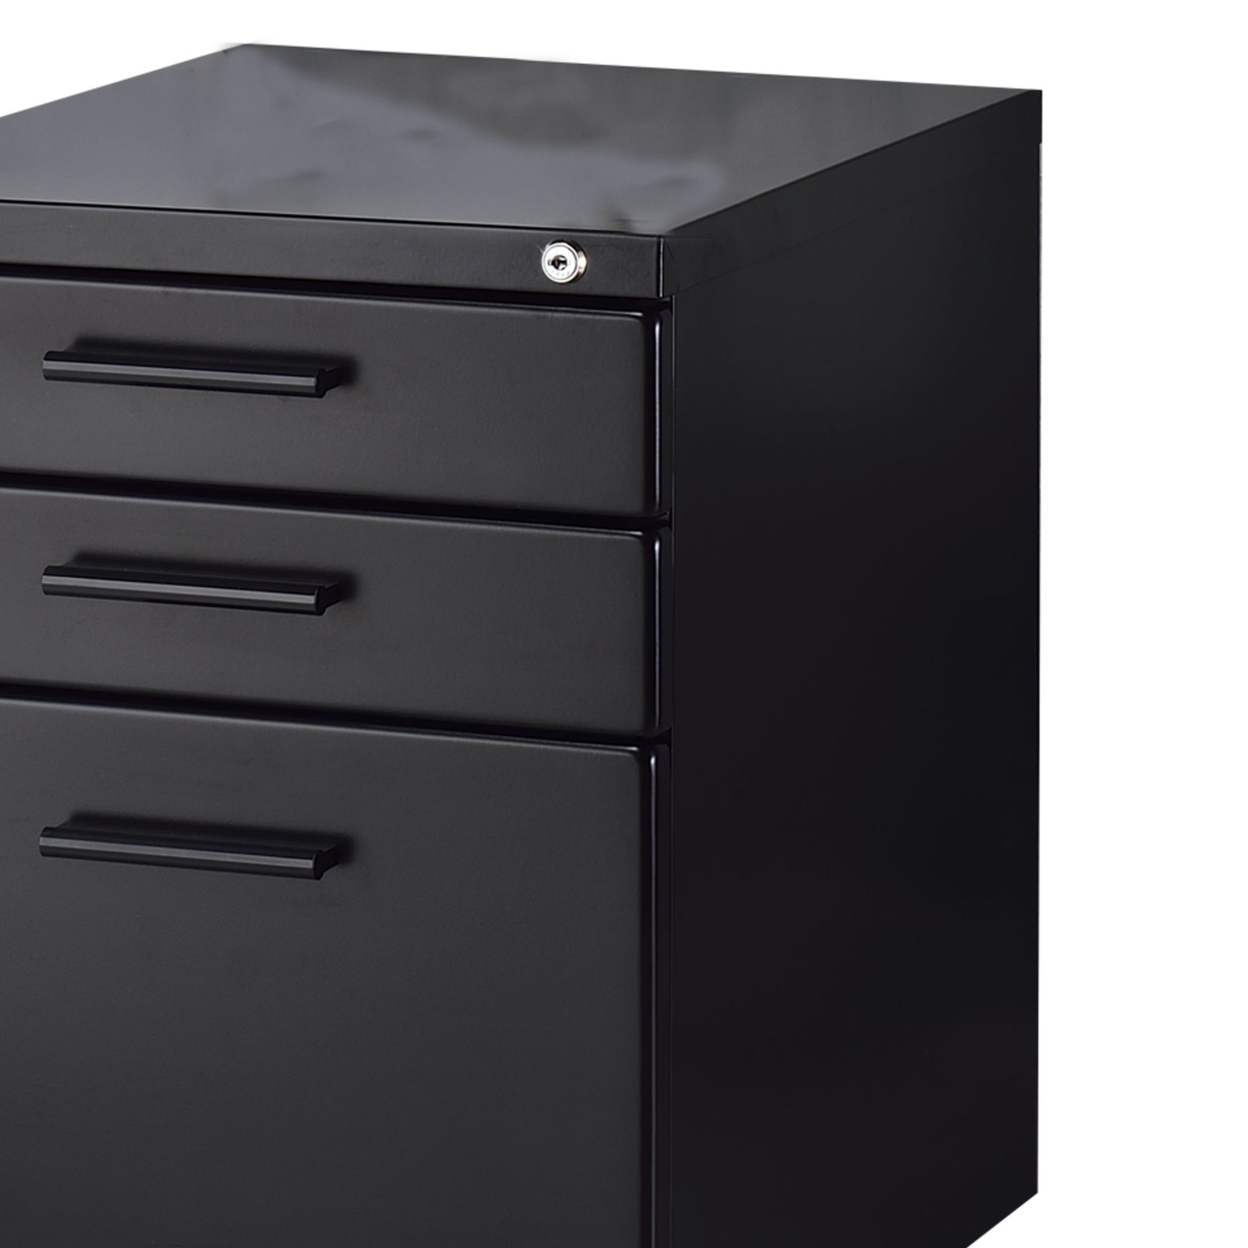 Contemporary Style File Cabinet With Lock System And Caster Support, Black- Saltoro Sherpi